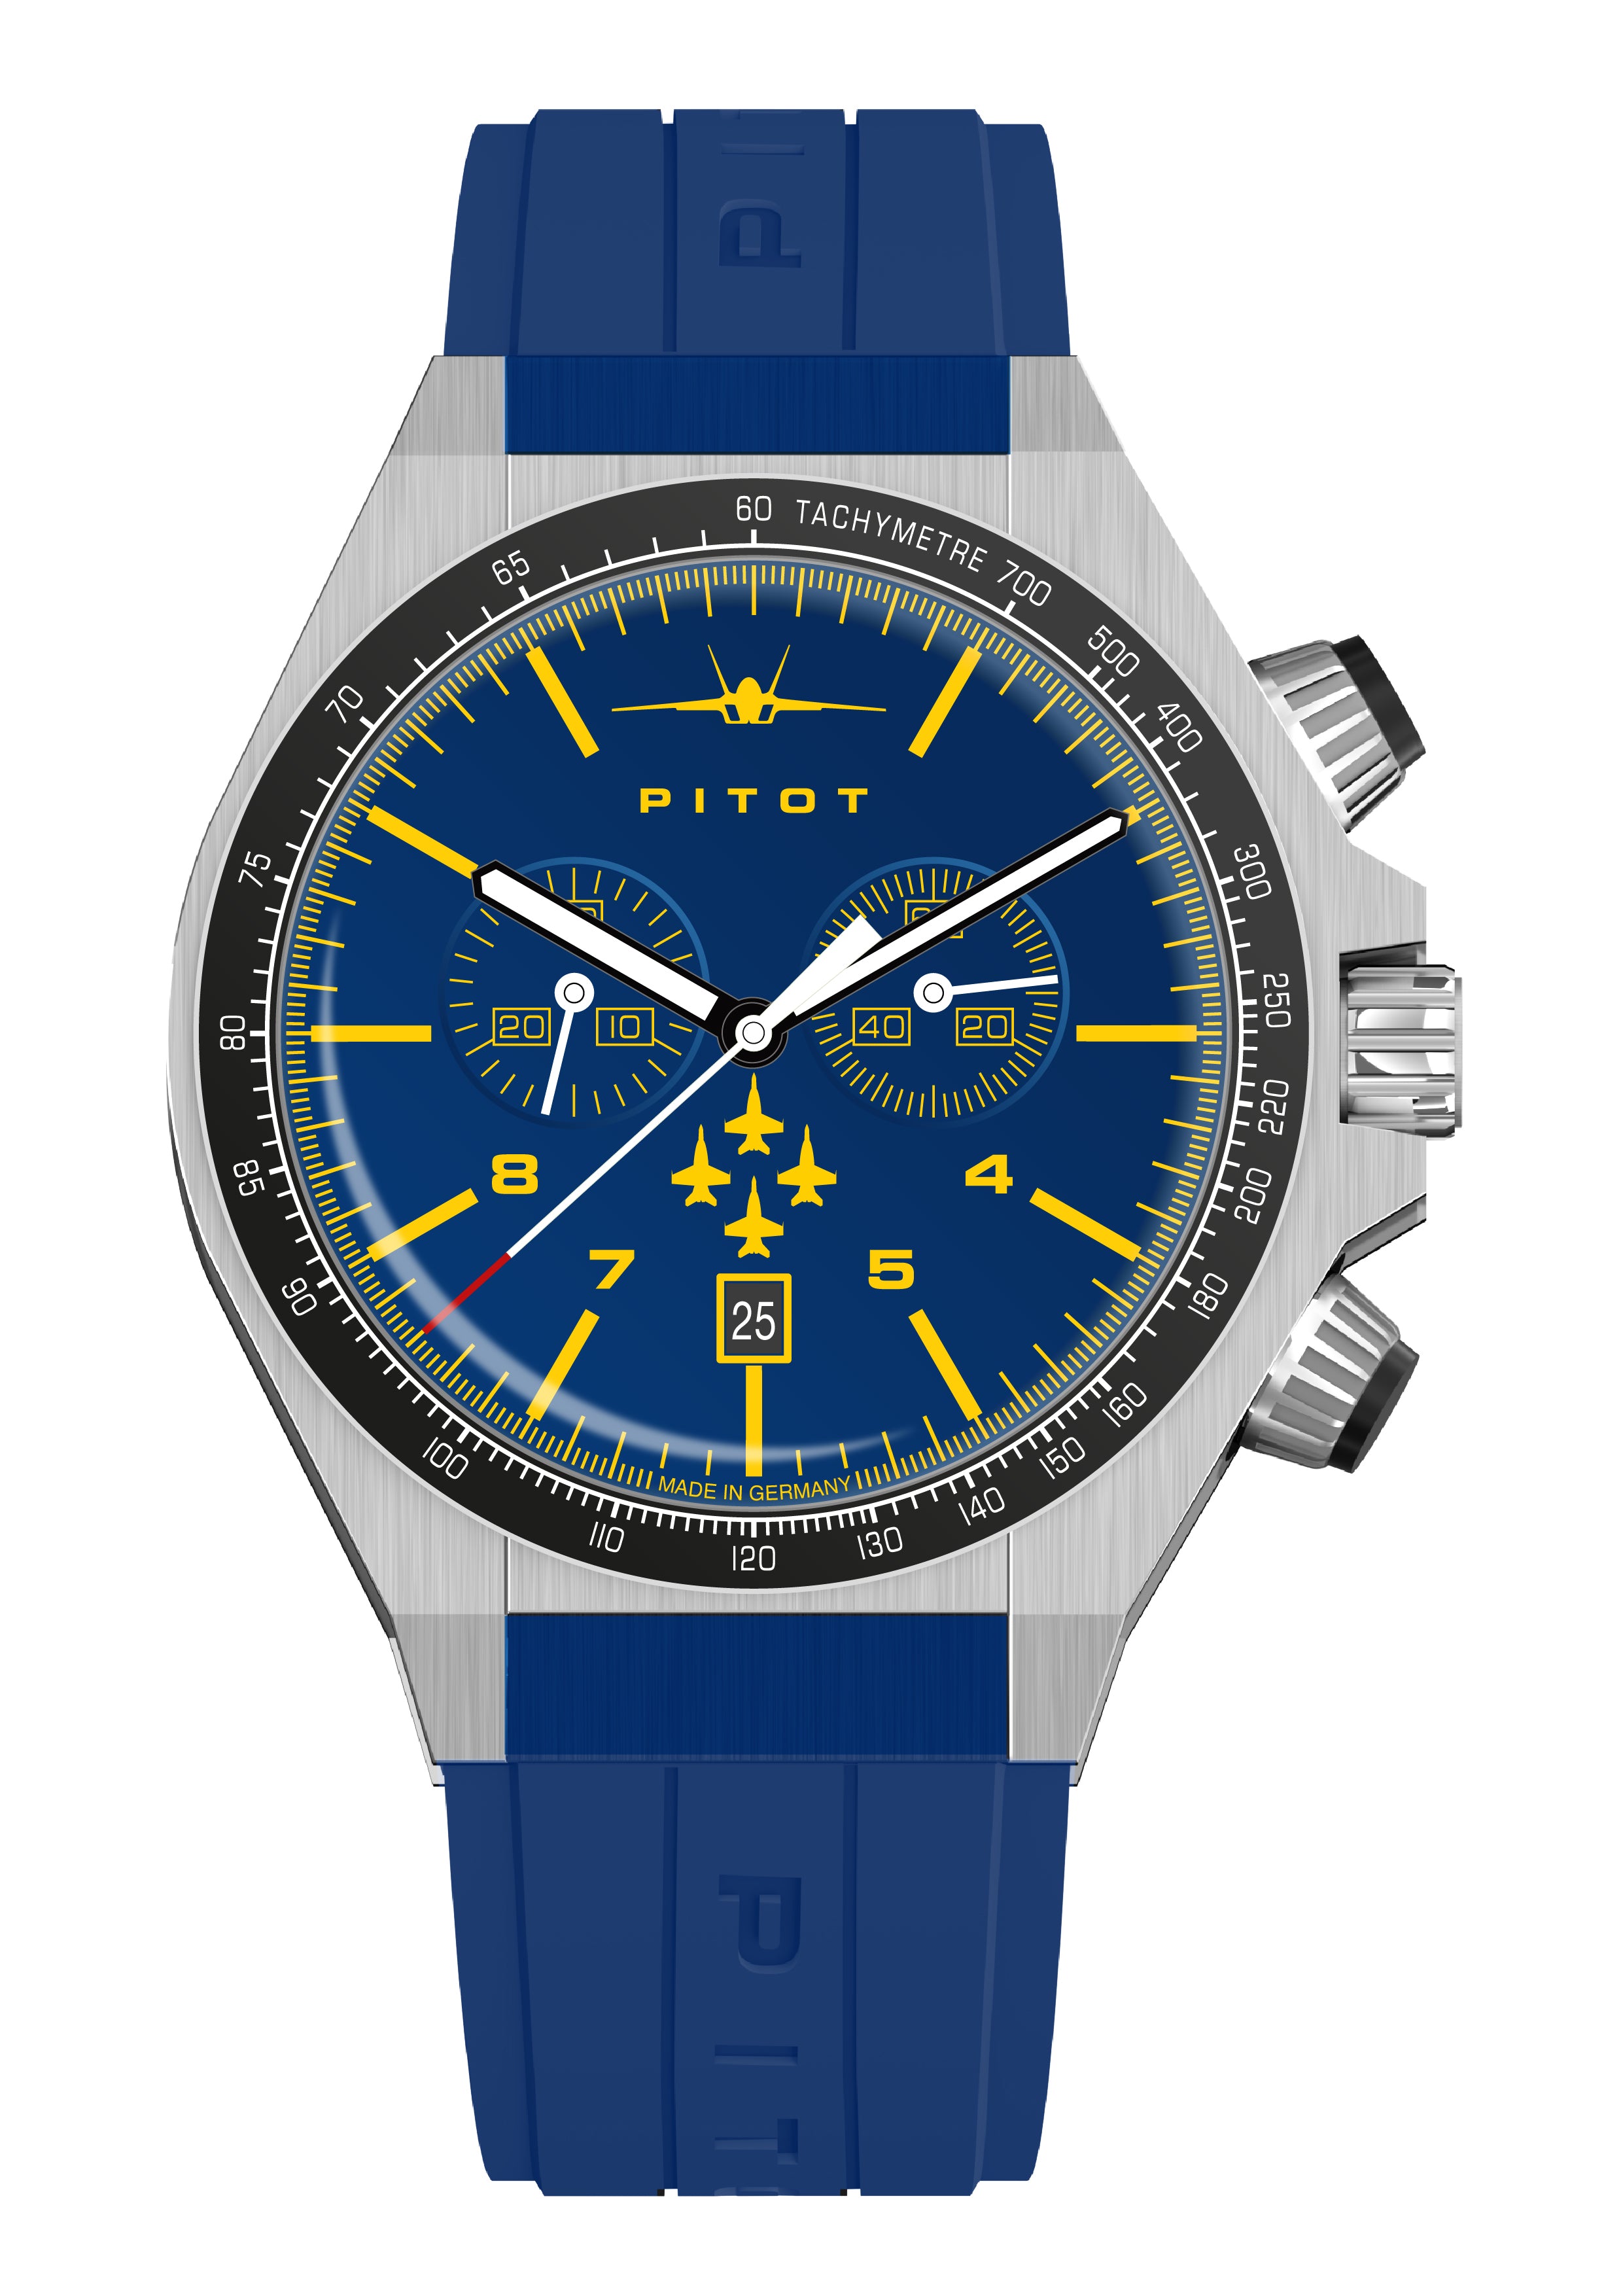 Reservation open for the new F/A-18 Super Hornet inspired watch